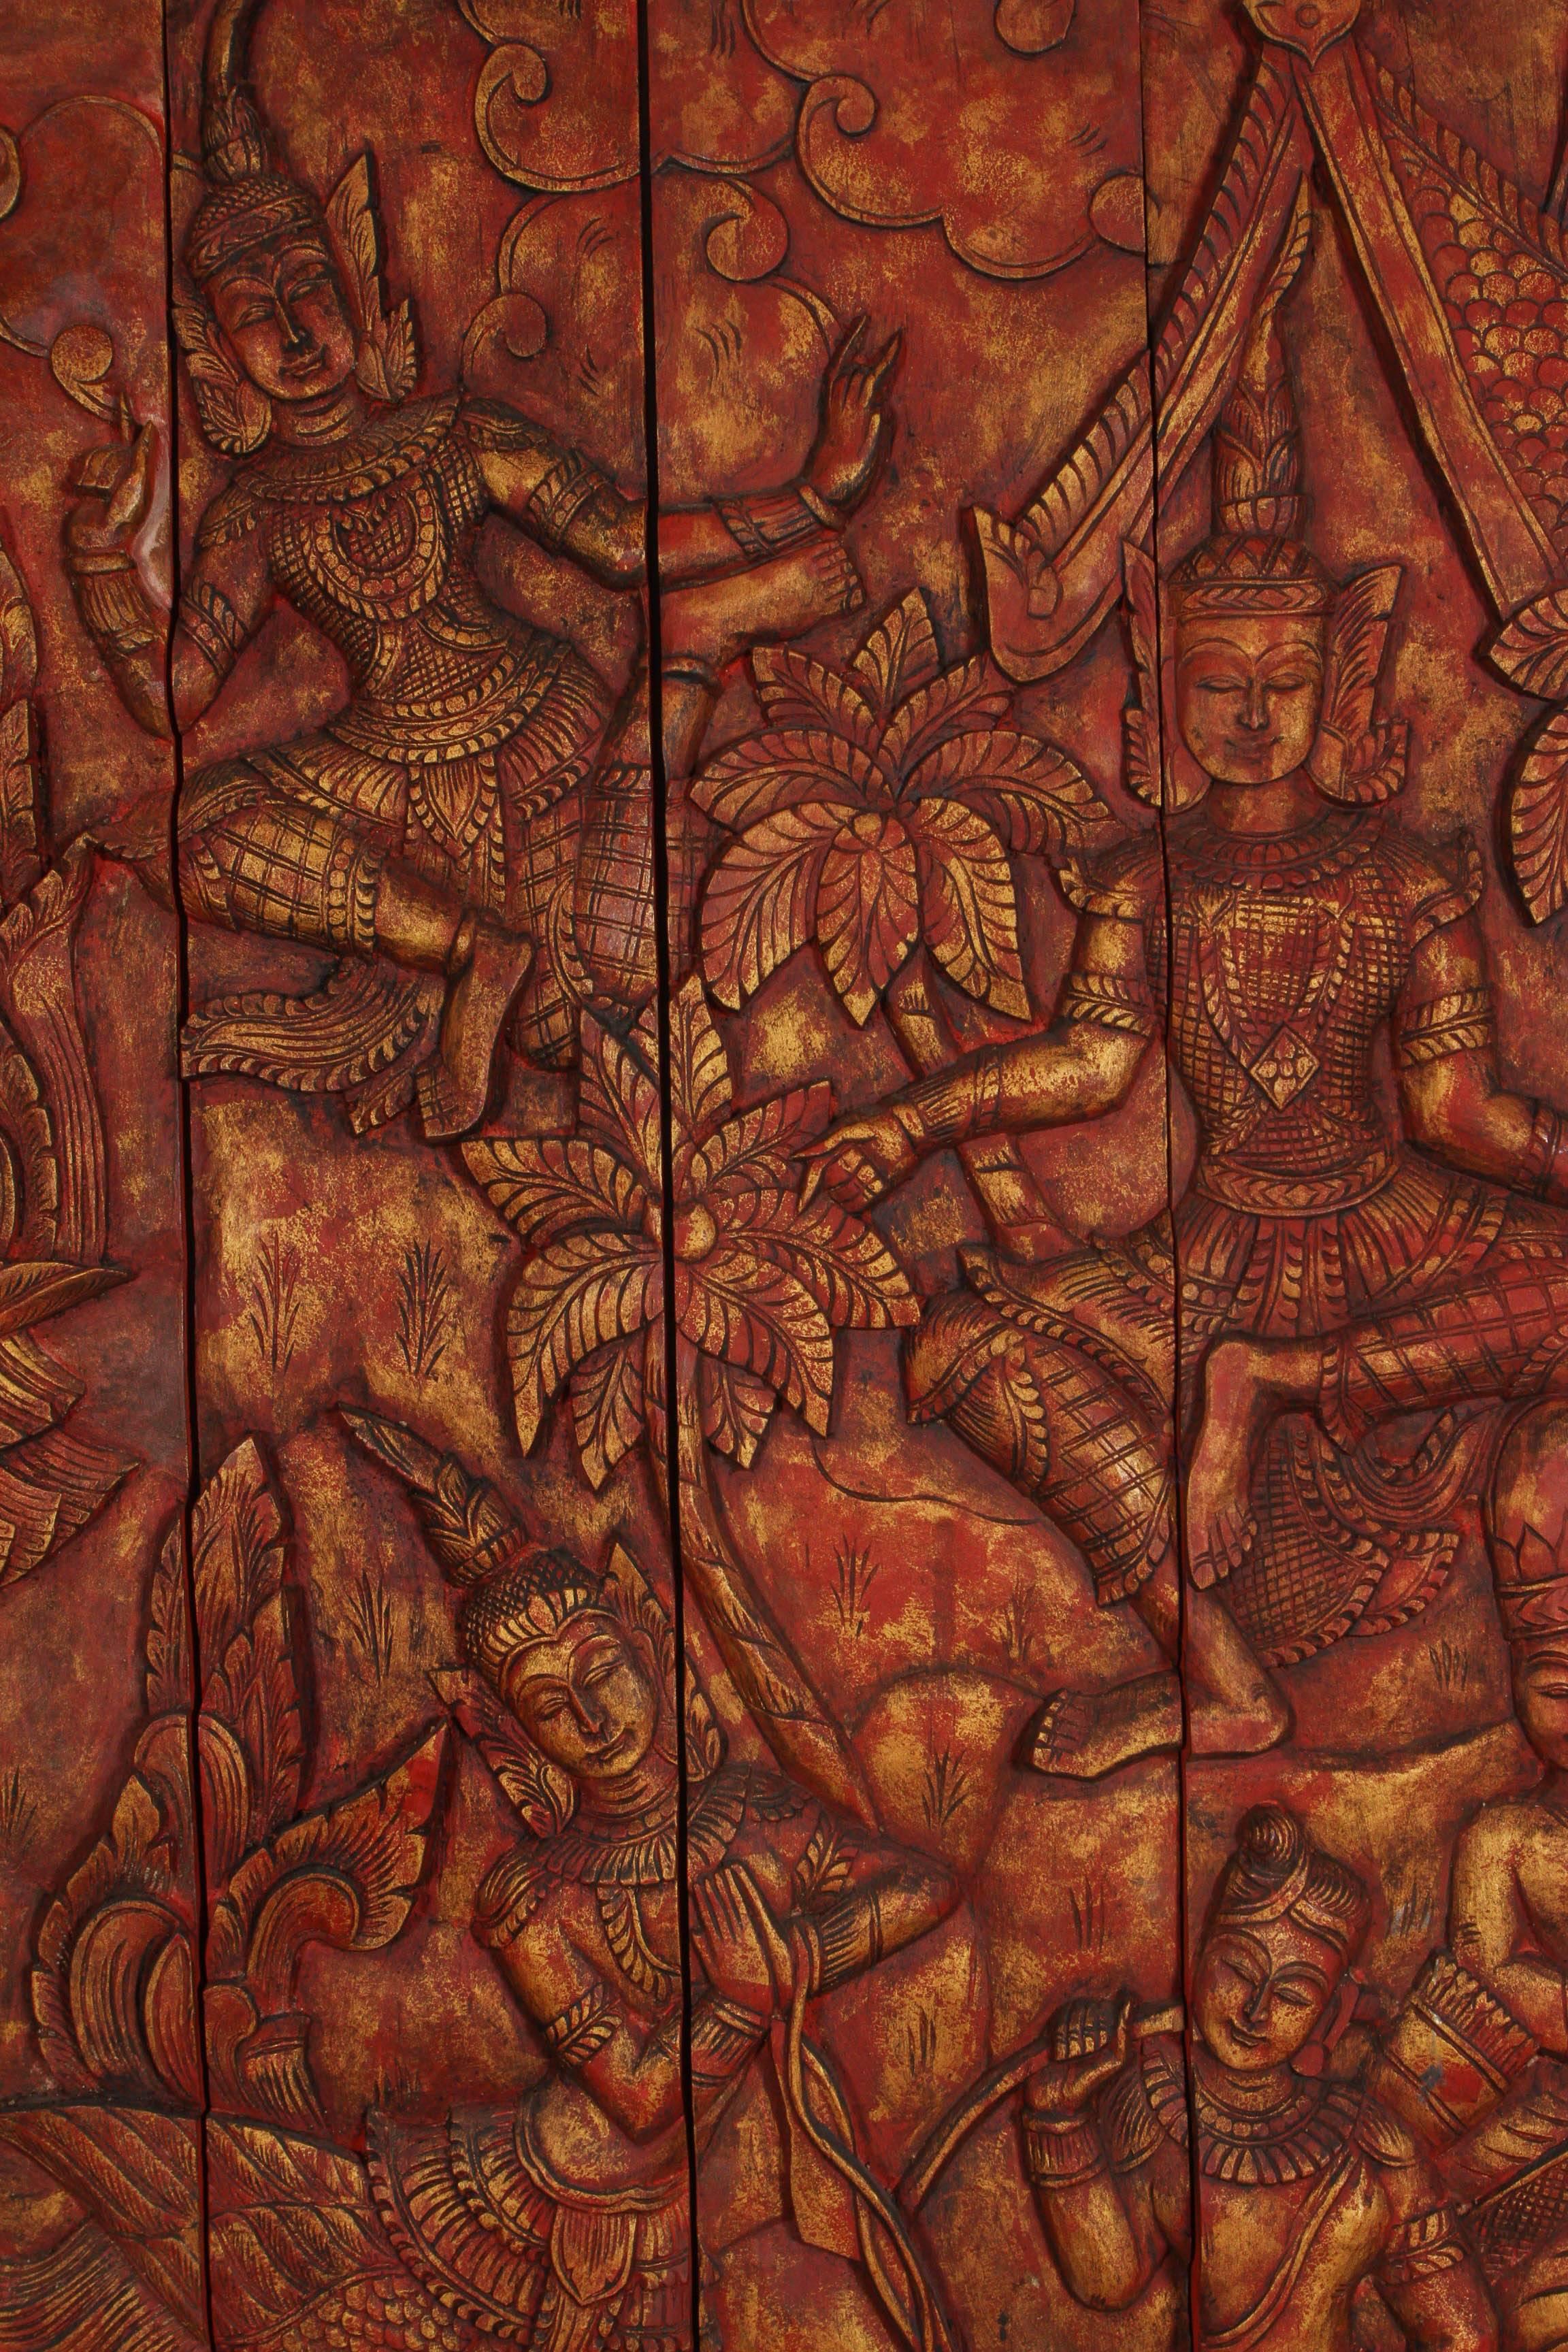 Antique Asian Thai monumental, measuring 8’ x 8' hand-carved wooden temple panel.
Definitely a one of a kind piece Thai red and gold panel with detailed hand-carved with relief designs of South Asian Thai Kinnaris, dancing and singing.
Half bird